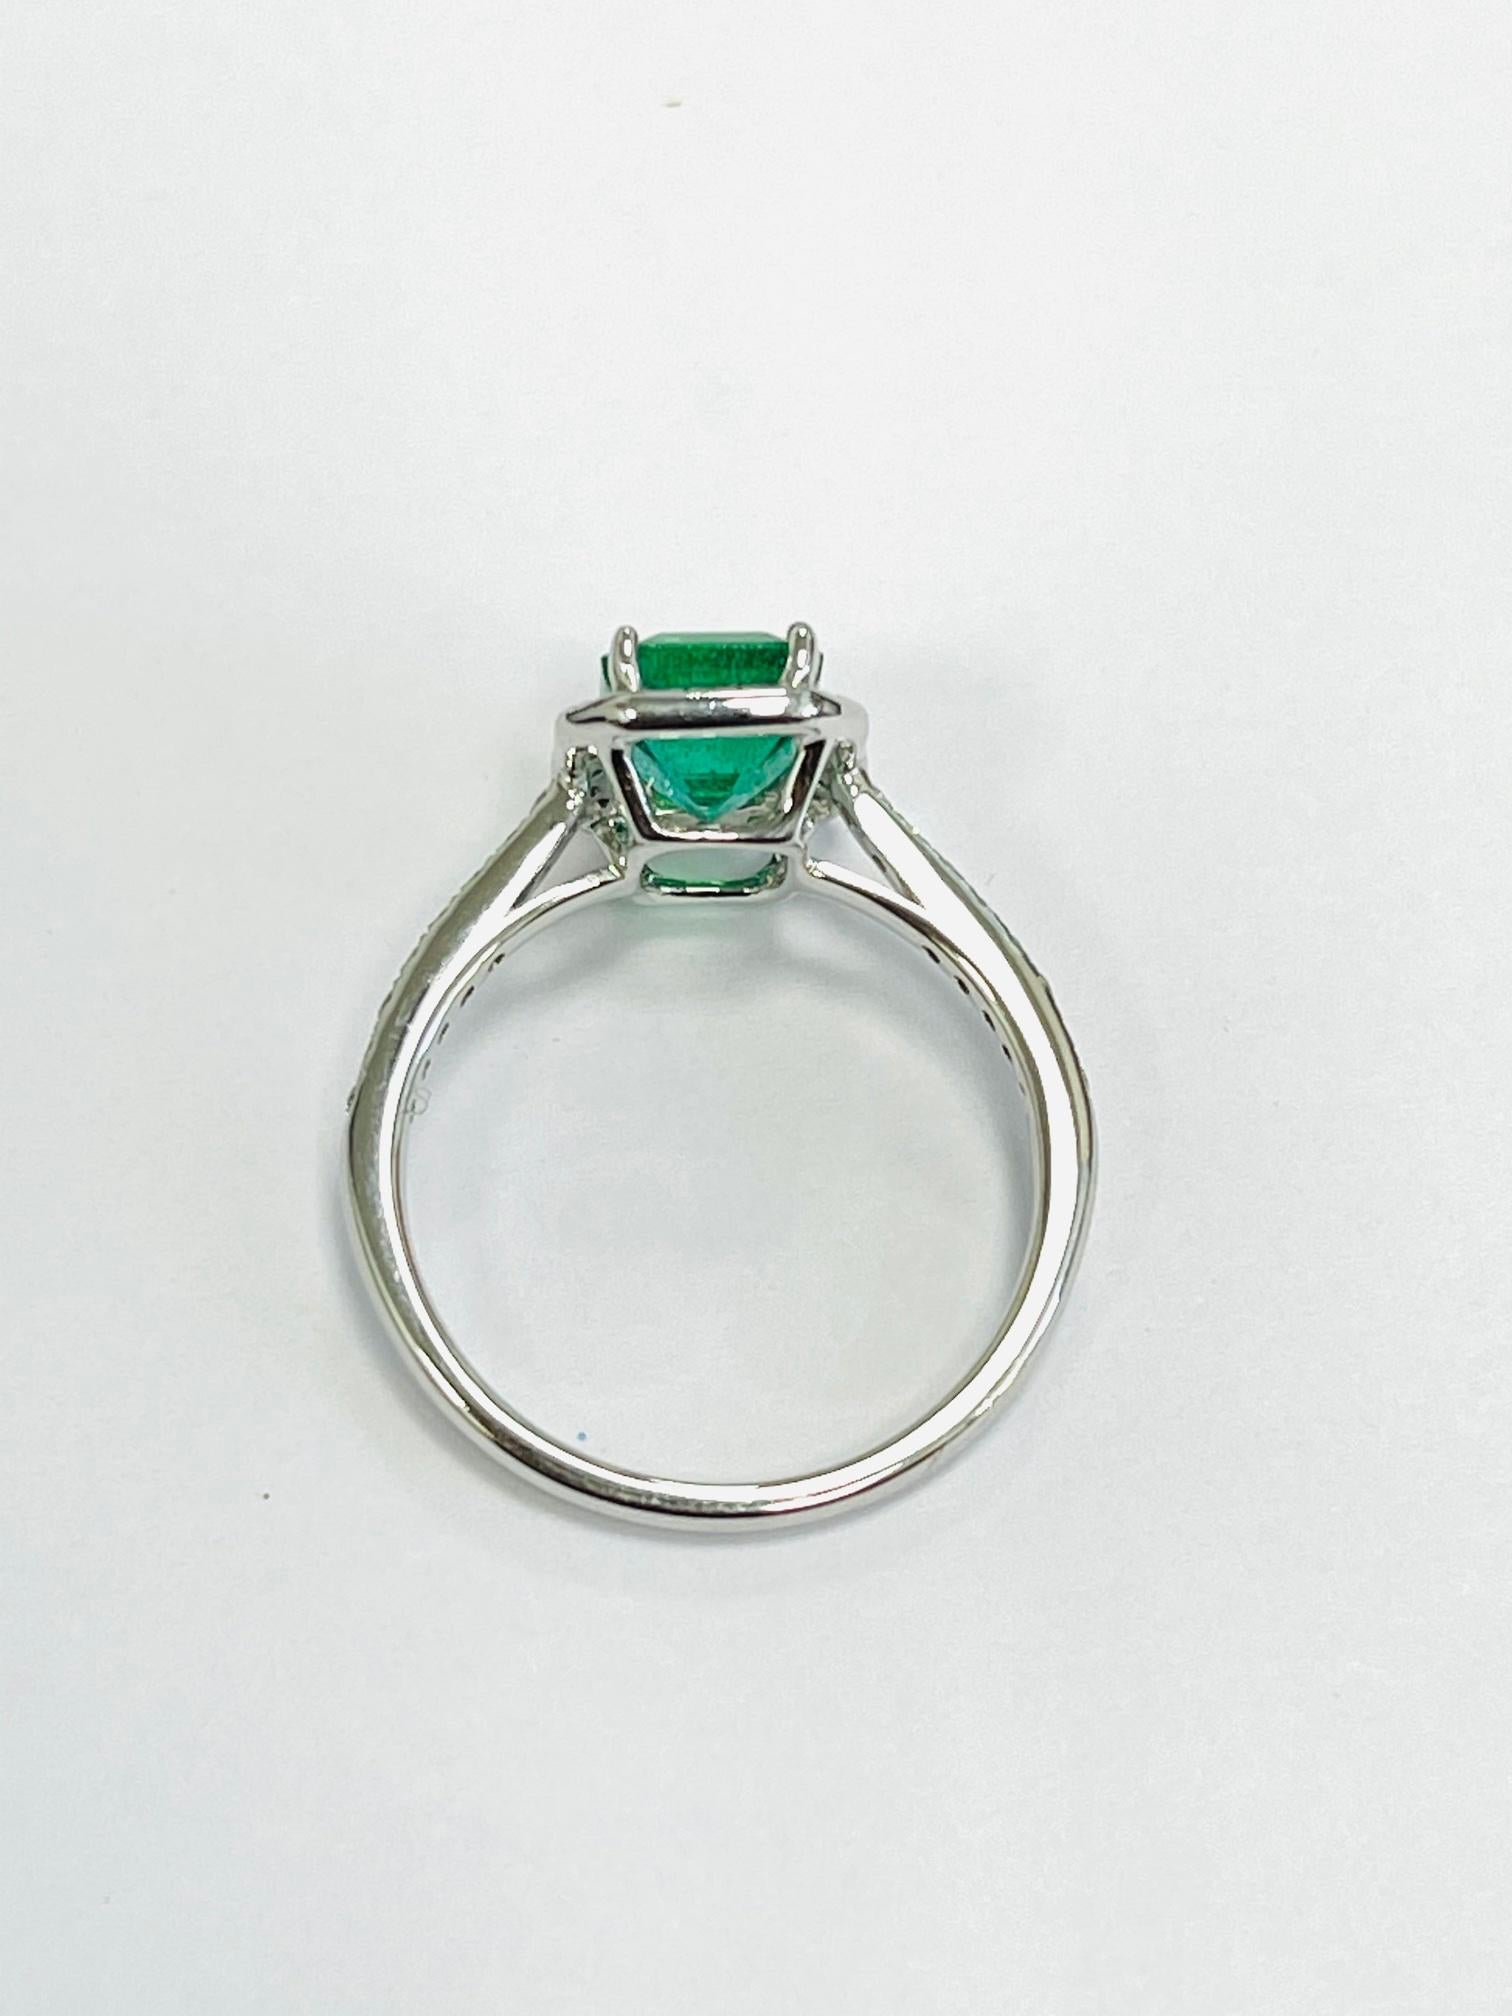 1.16 Carat Emerald Diamond Cocktail Ring In New Condition For Sale In New York, NY